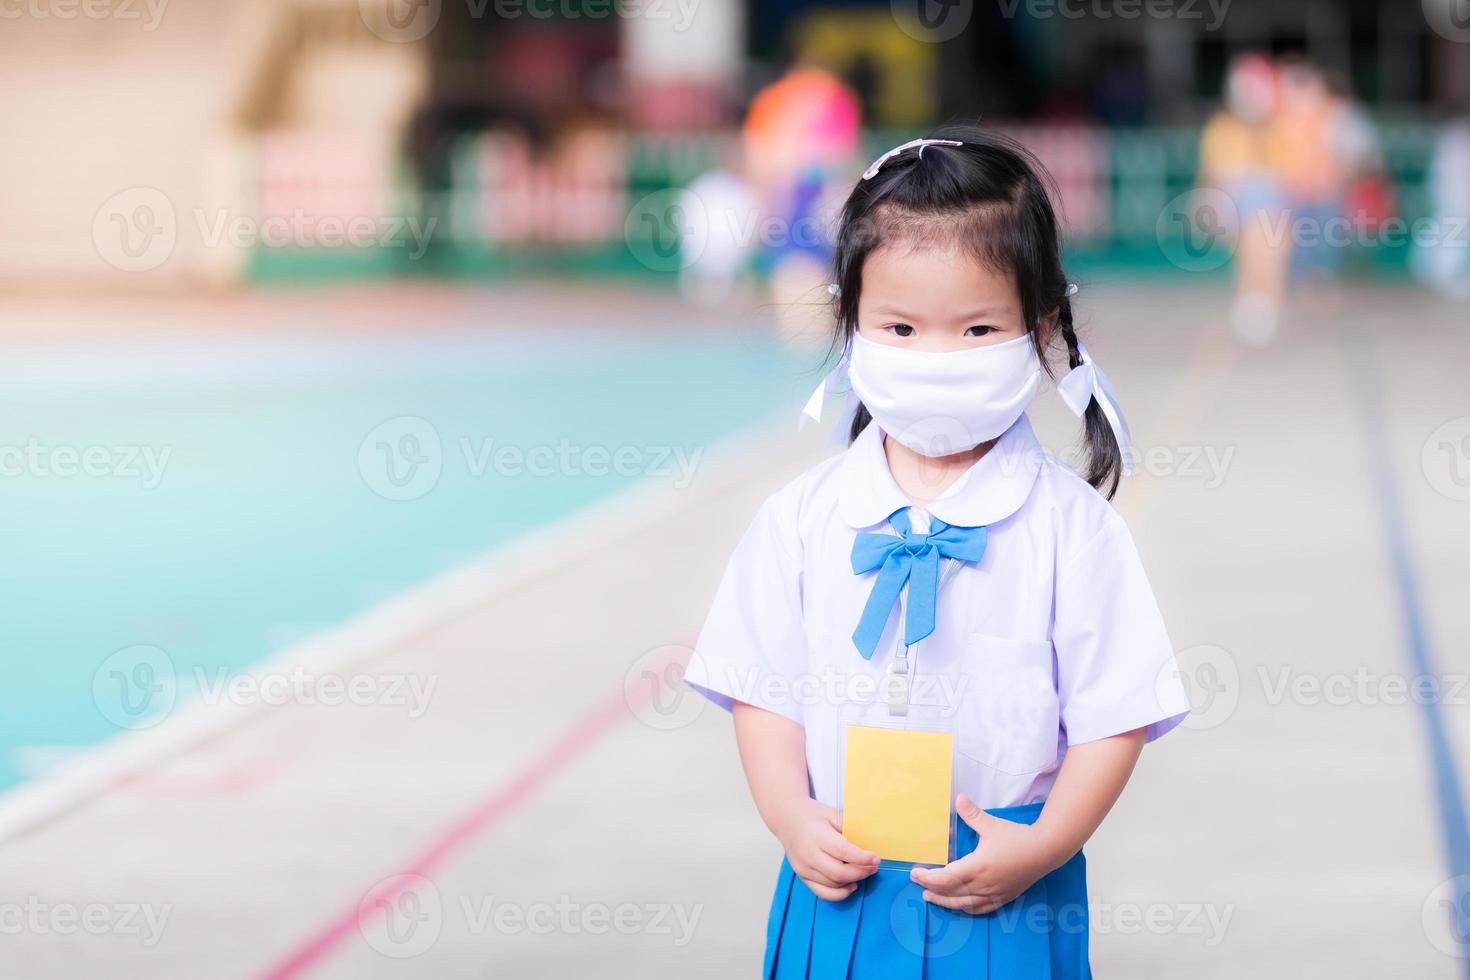 Child wearing white cloth face mask in school uniform is standing. Children go to school with new way of life New Normal. Cute kid looks at the camera. Kindergarten toddler age 3 years old. photo